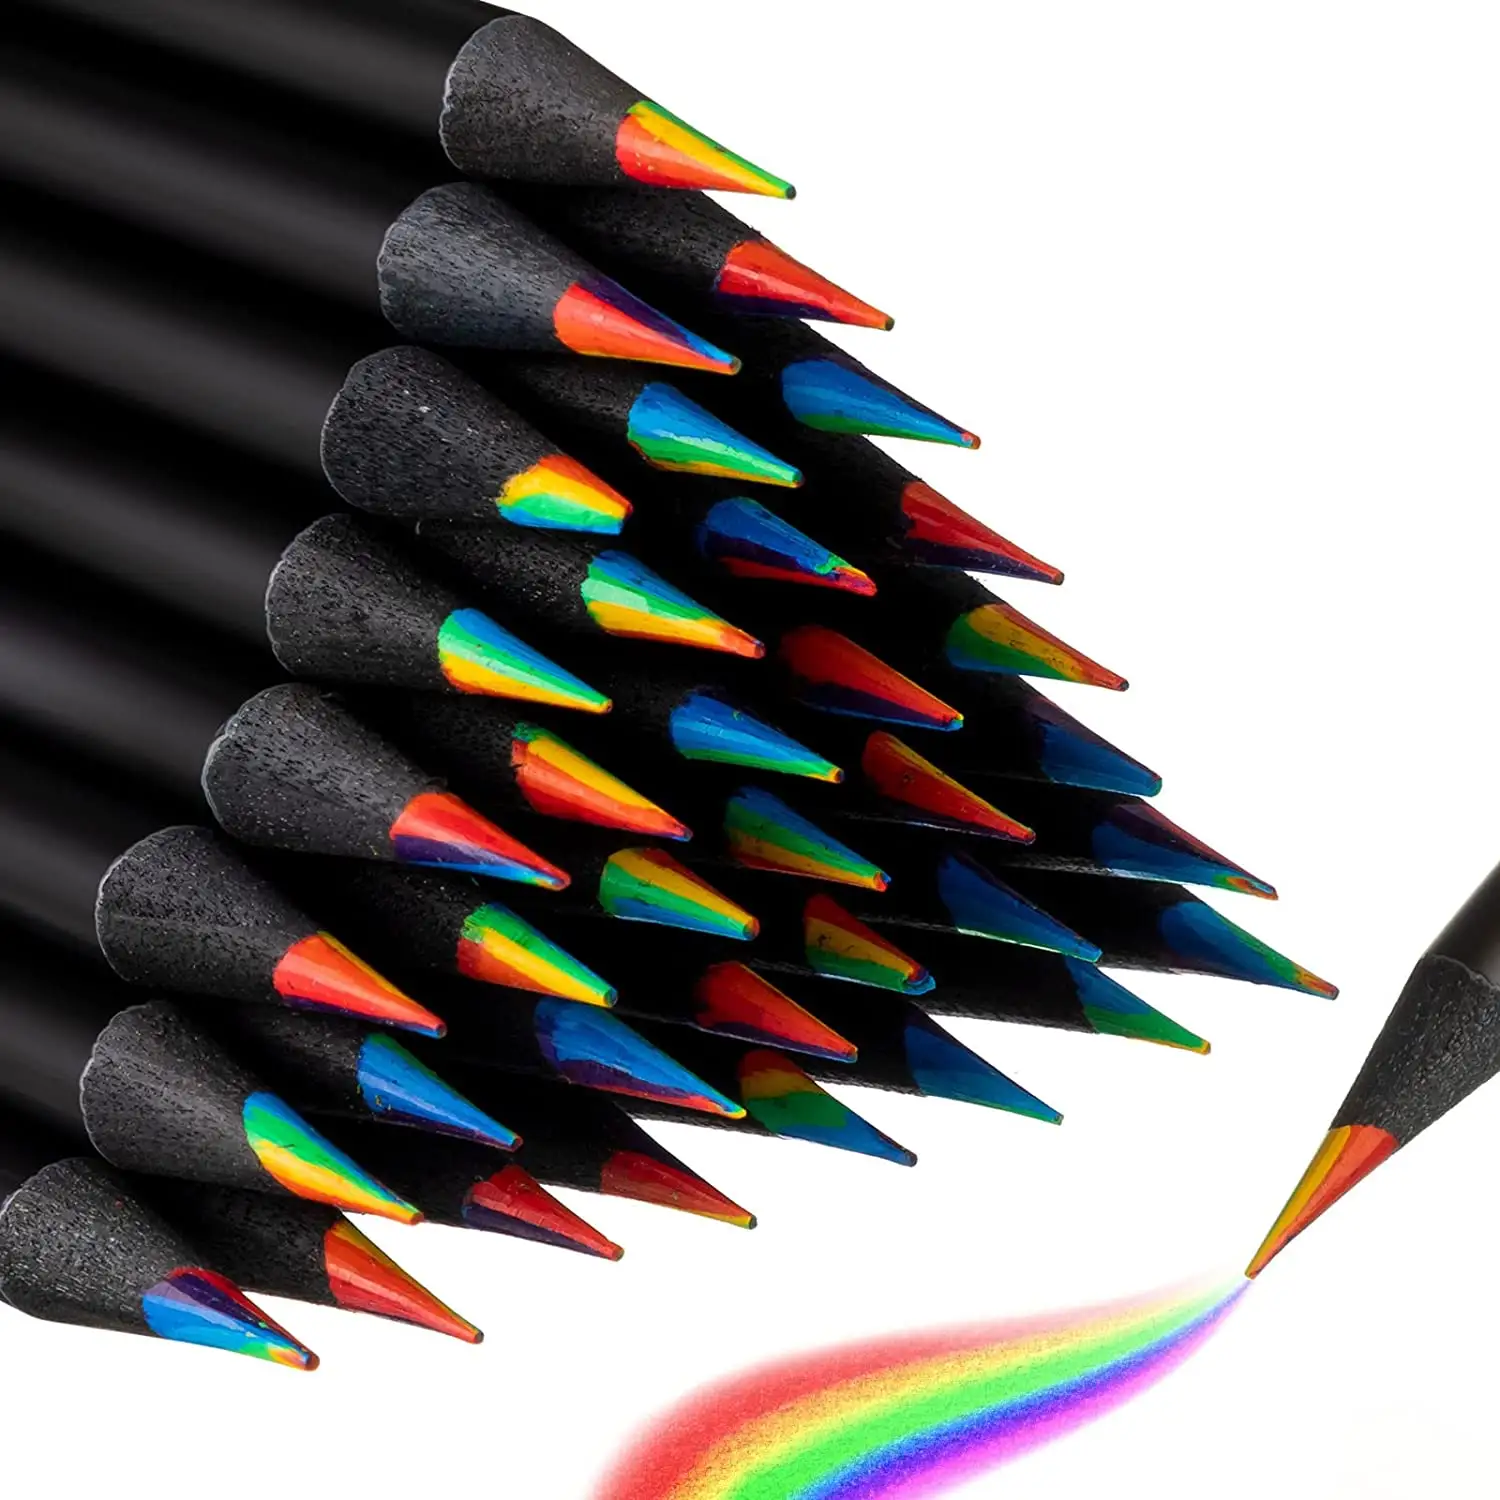 XinyiArt Art Supplier 3.3mm Pencil Lead Wooden Black 7 Color In 1 Rainbow Colored Pencils Multicolored Pencil for Coloring Book